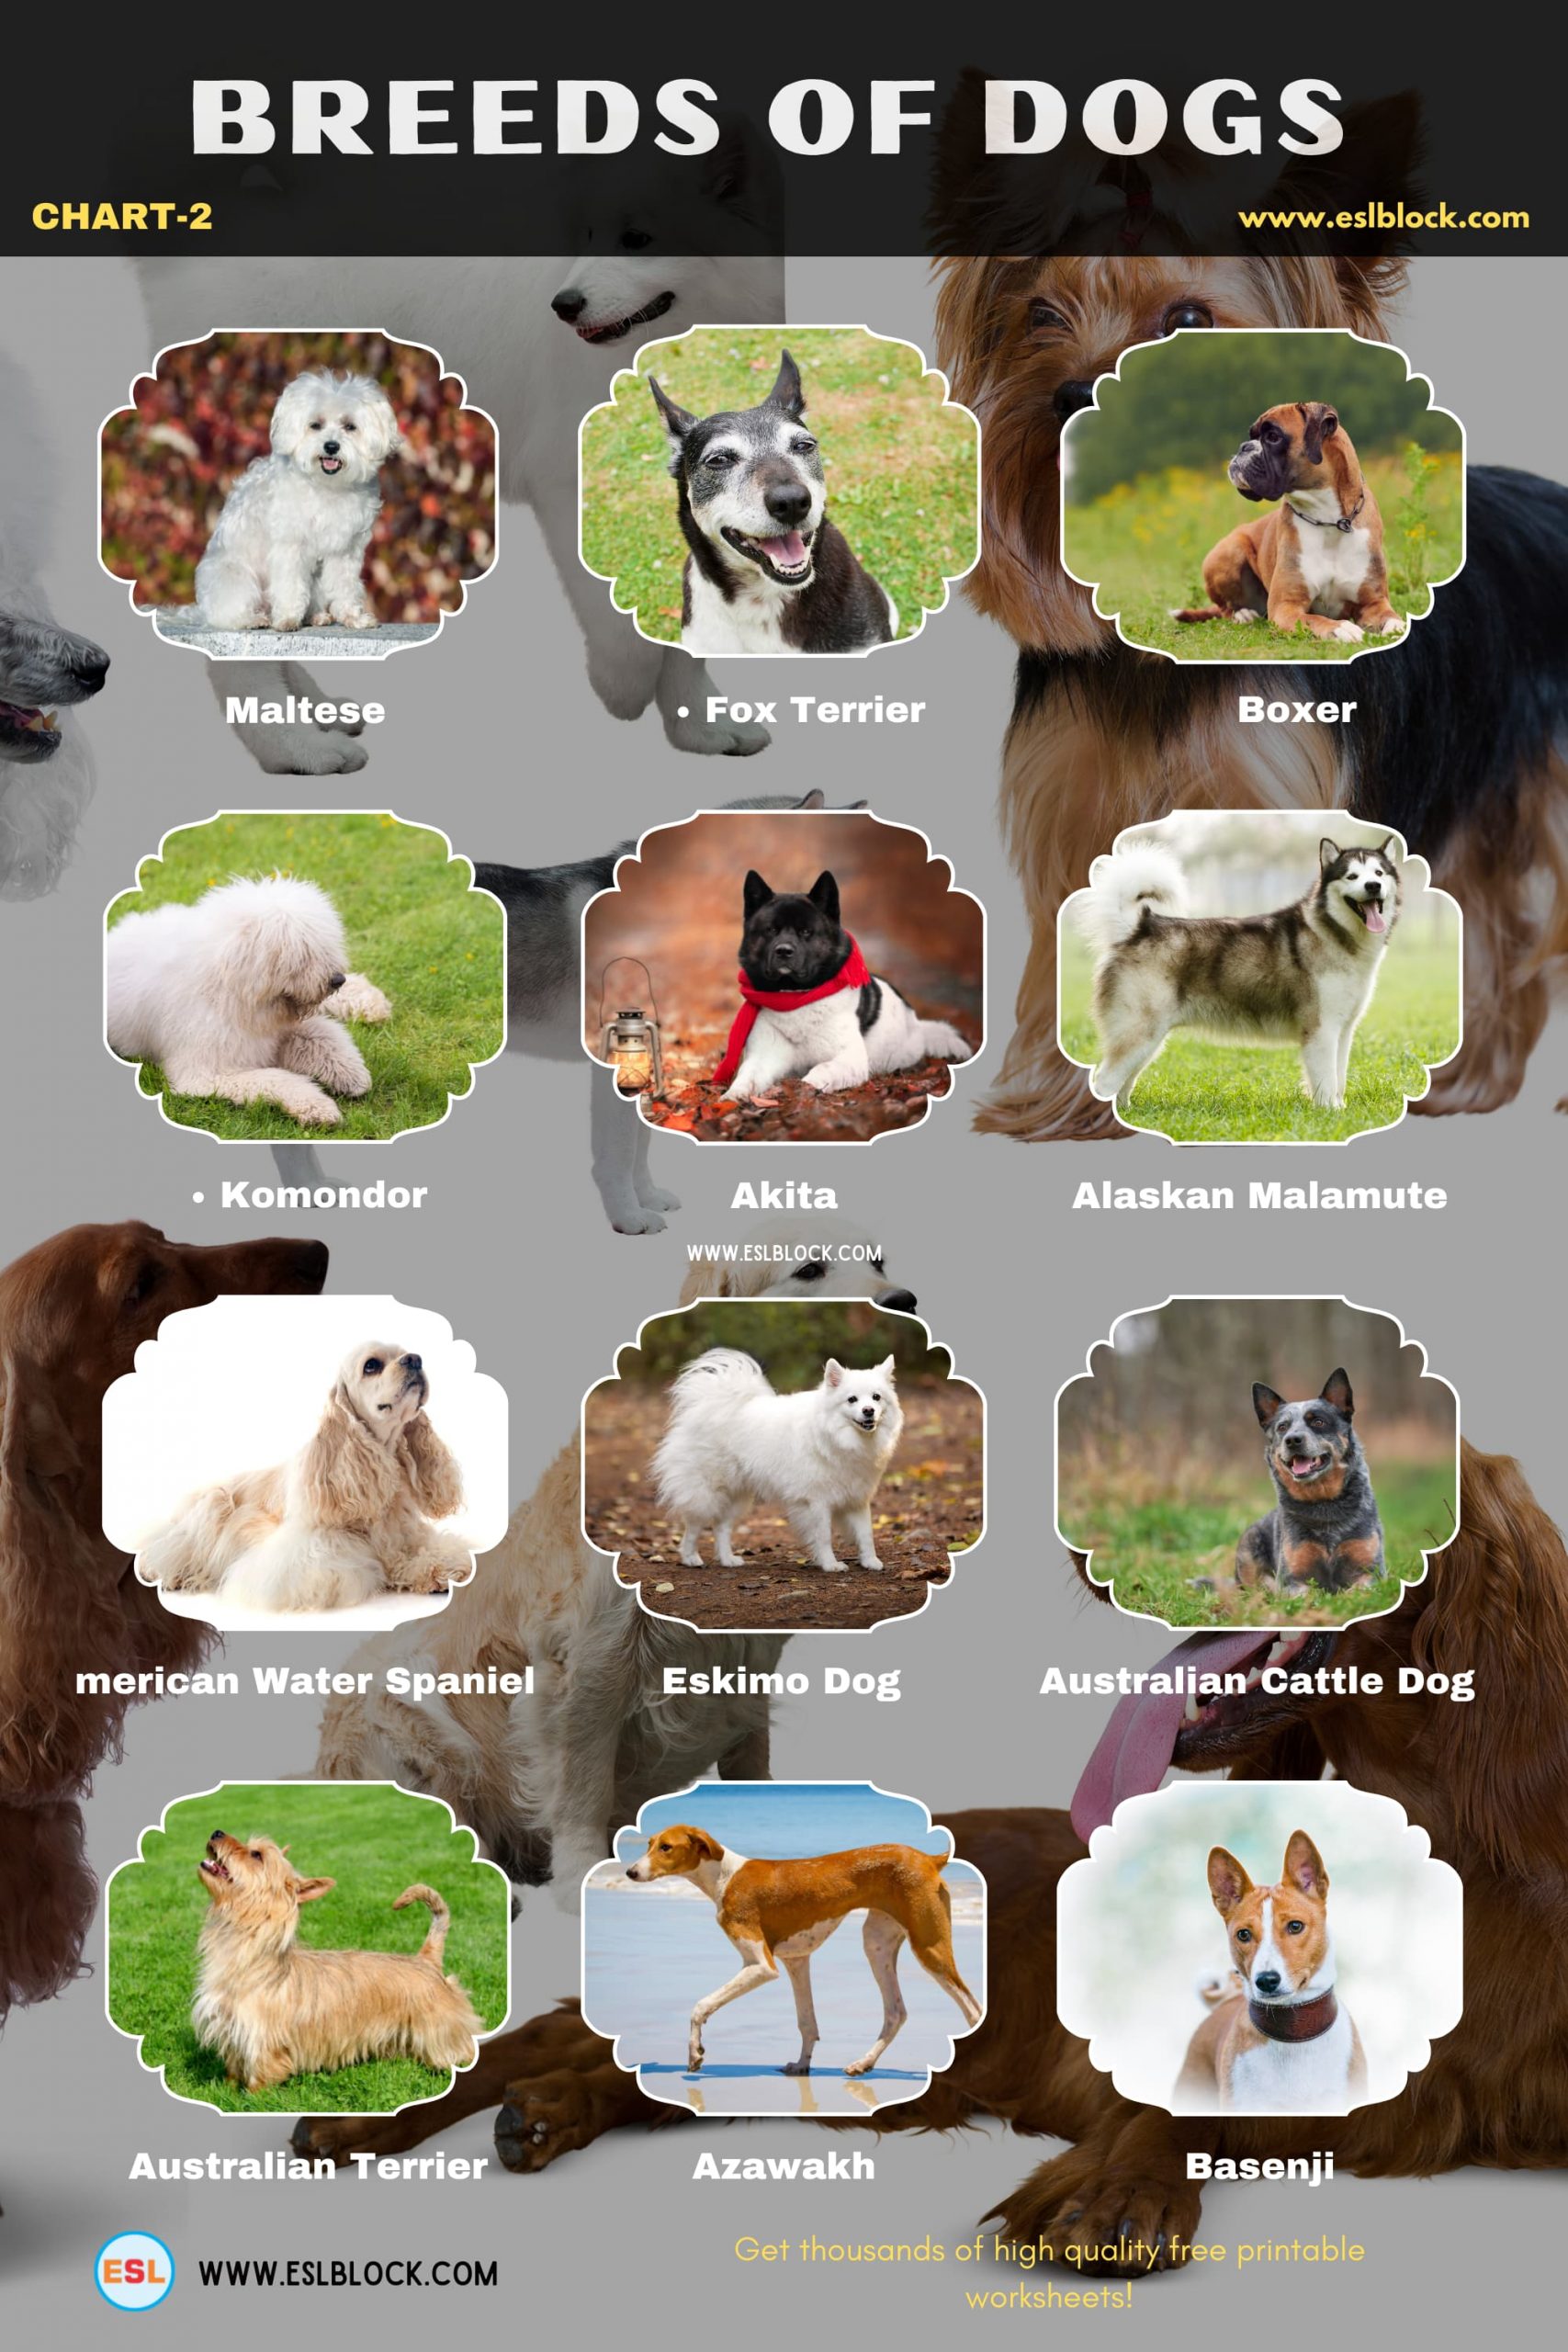 Animals Names, Best dog breeds, Big dog breeds, Cute dog breeds, Different Types of Dogs, Dog Breeds, Dogs List, English, English Nouns, English Vocabulary, English Words, Hunting dog breeds, List of Dog Breeds, Medium dog breeds, Nouns, Small dog breeds, Vocabulary